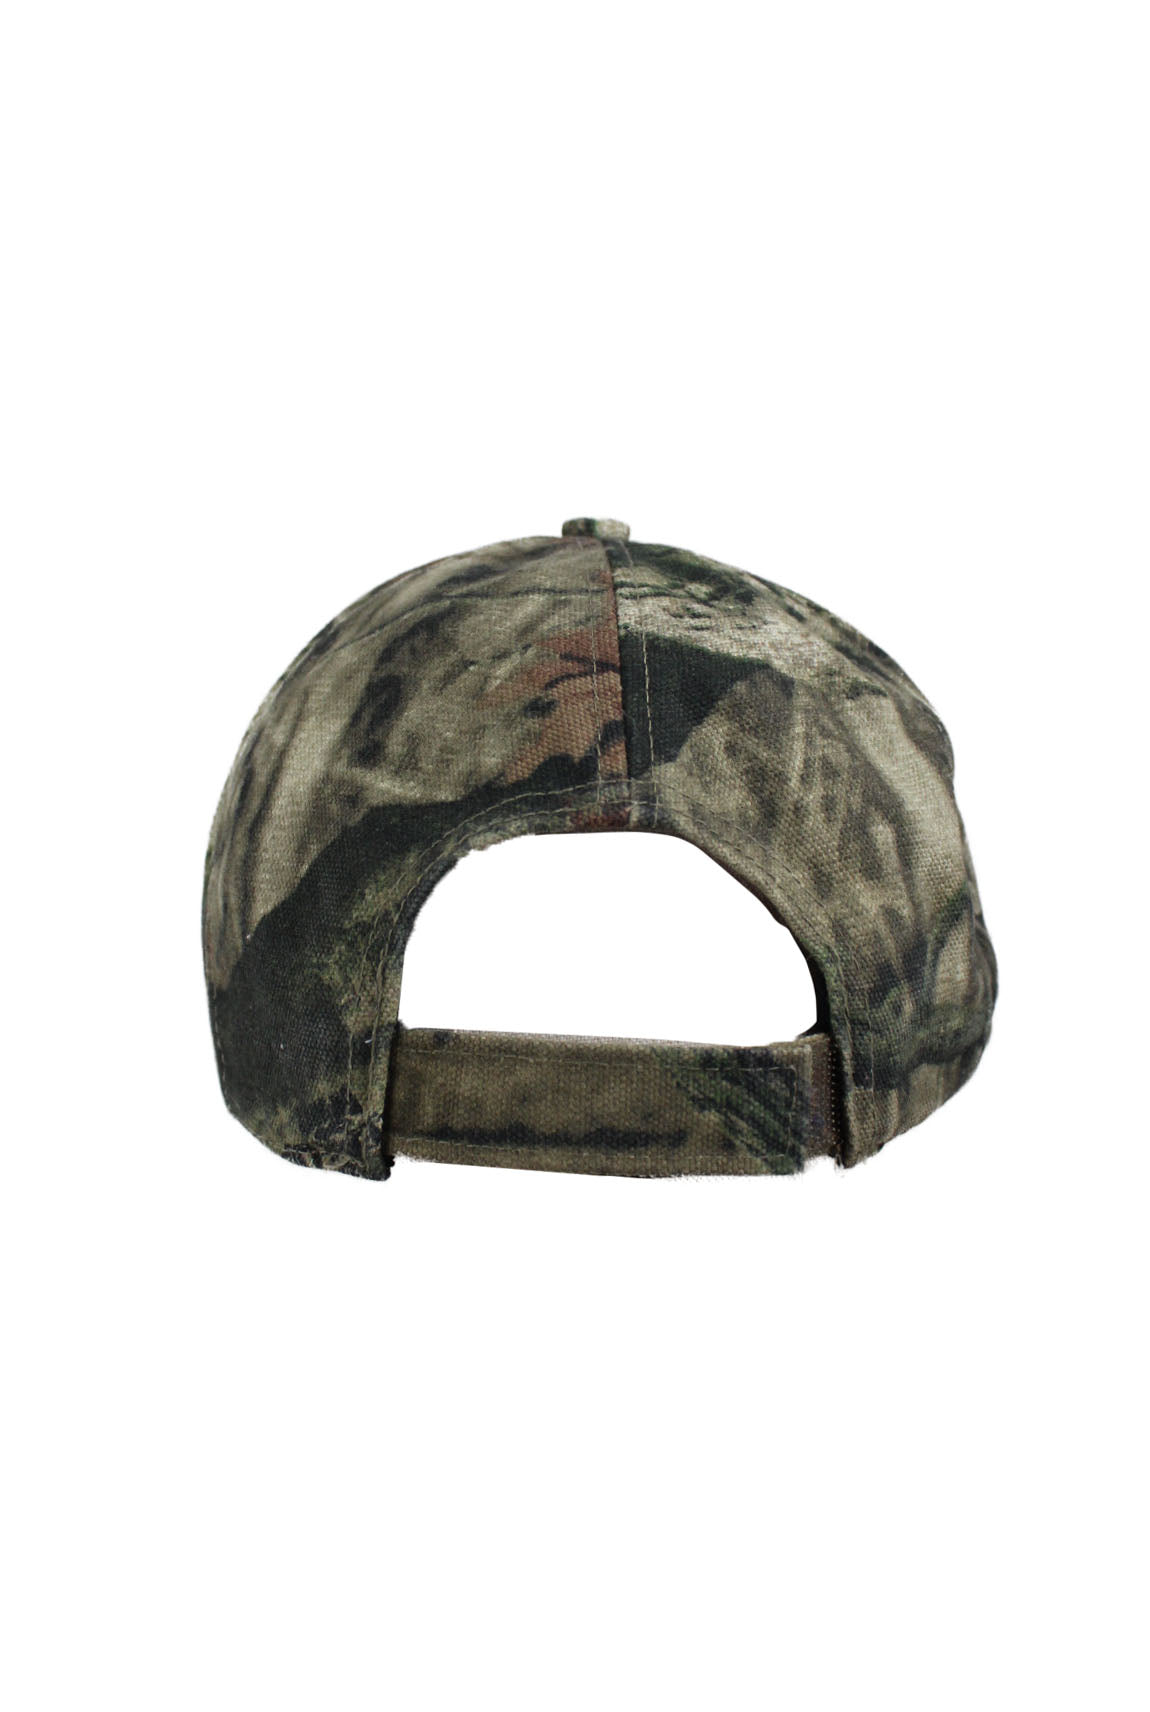 rear view with adjustable velcro strap closure of hat.